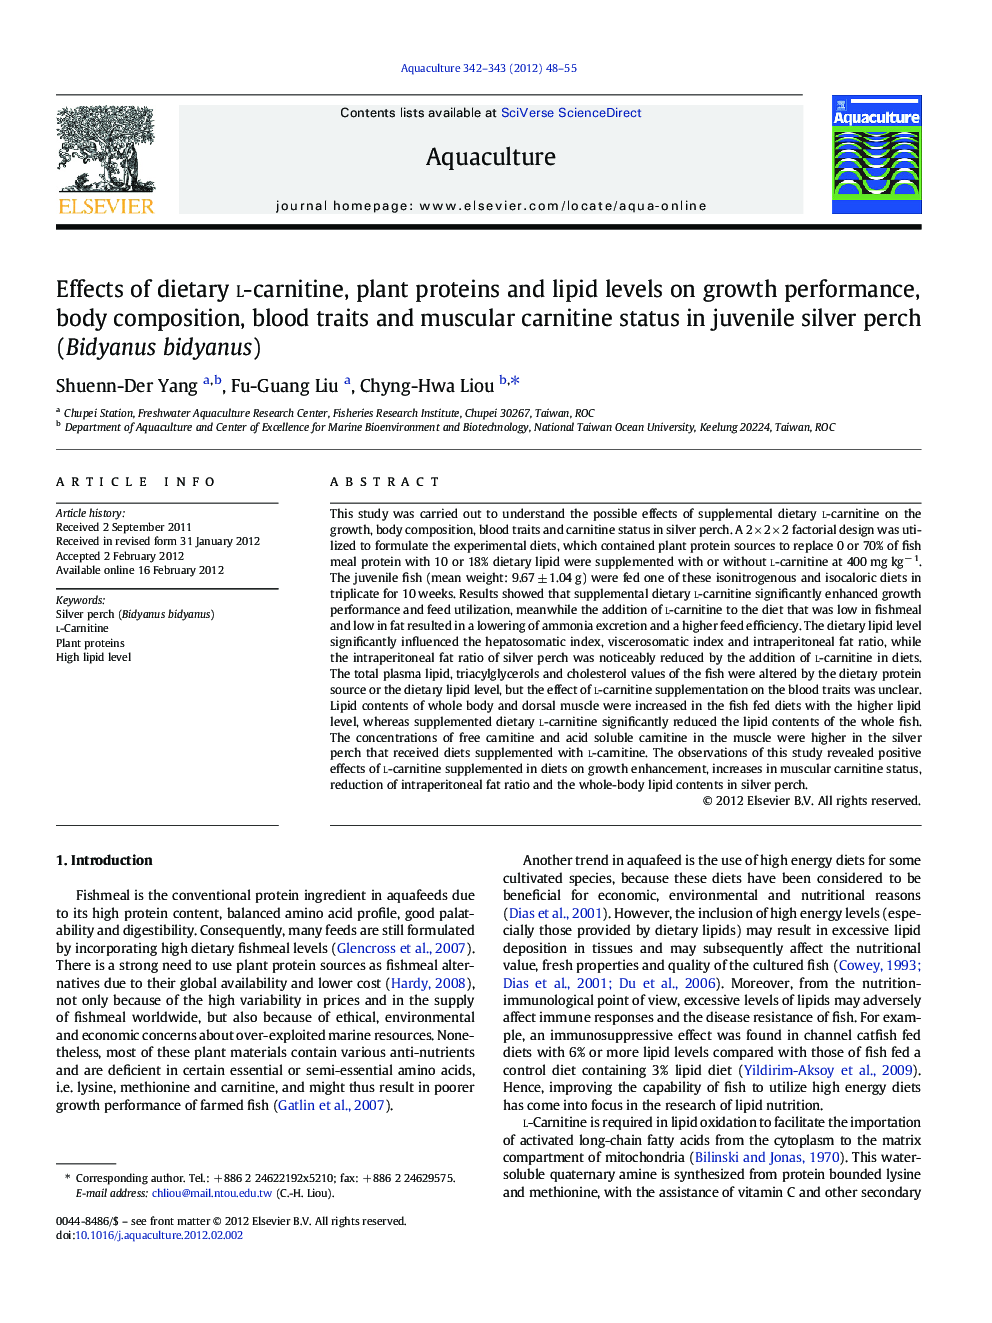 Effects of dietary l-carnitine, plant proteins and lipid levels on growth performance, body composition, blood traits and muscular carnitine status in juvenile silver perch (Bidyanus bidyanus)